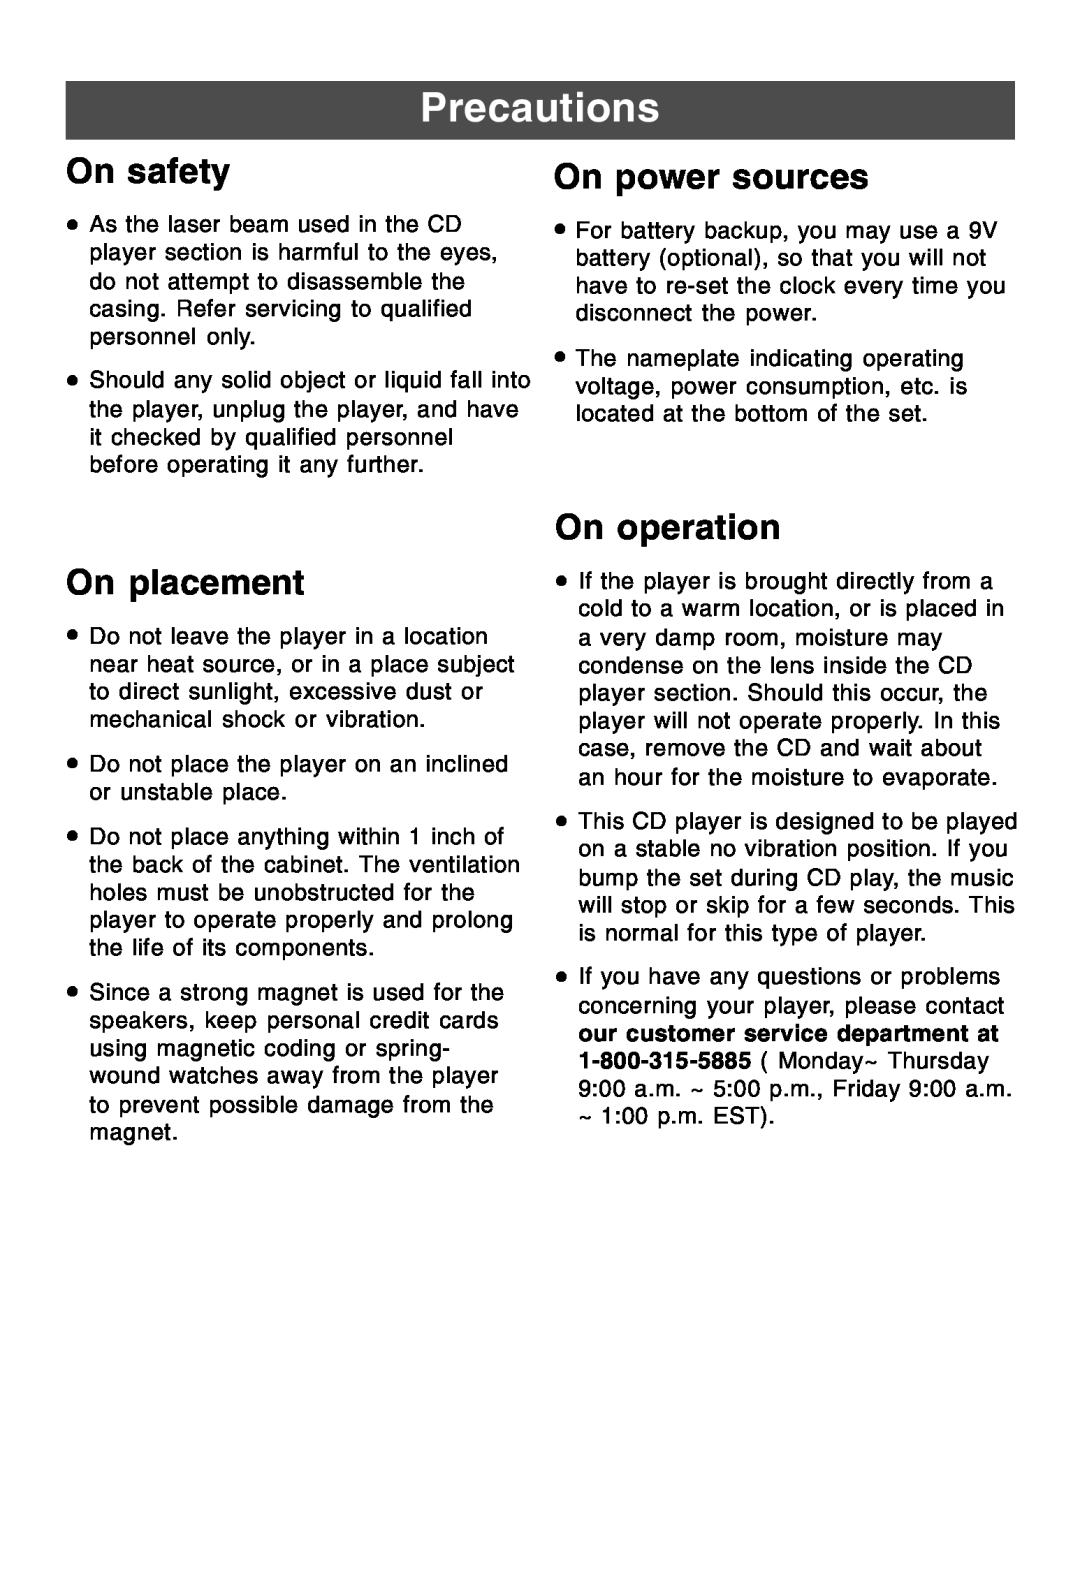 Lenoxx Electronics CDR-190 operating instructions Precautions, On safety, On power sources, On placement, On operation 